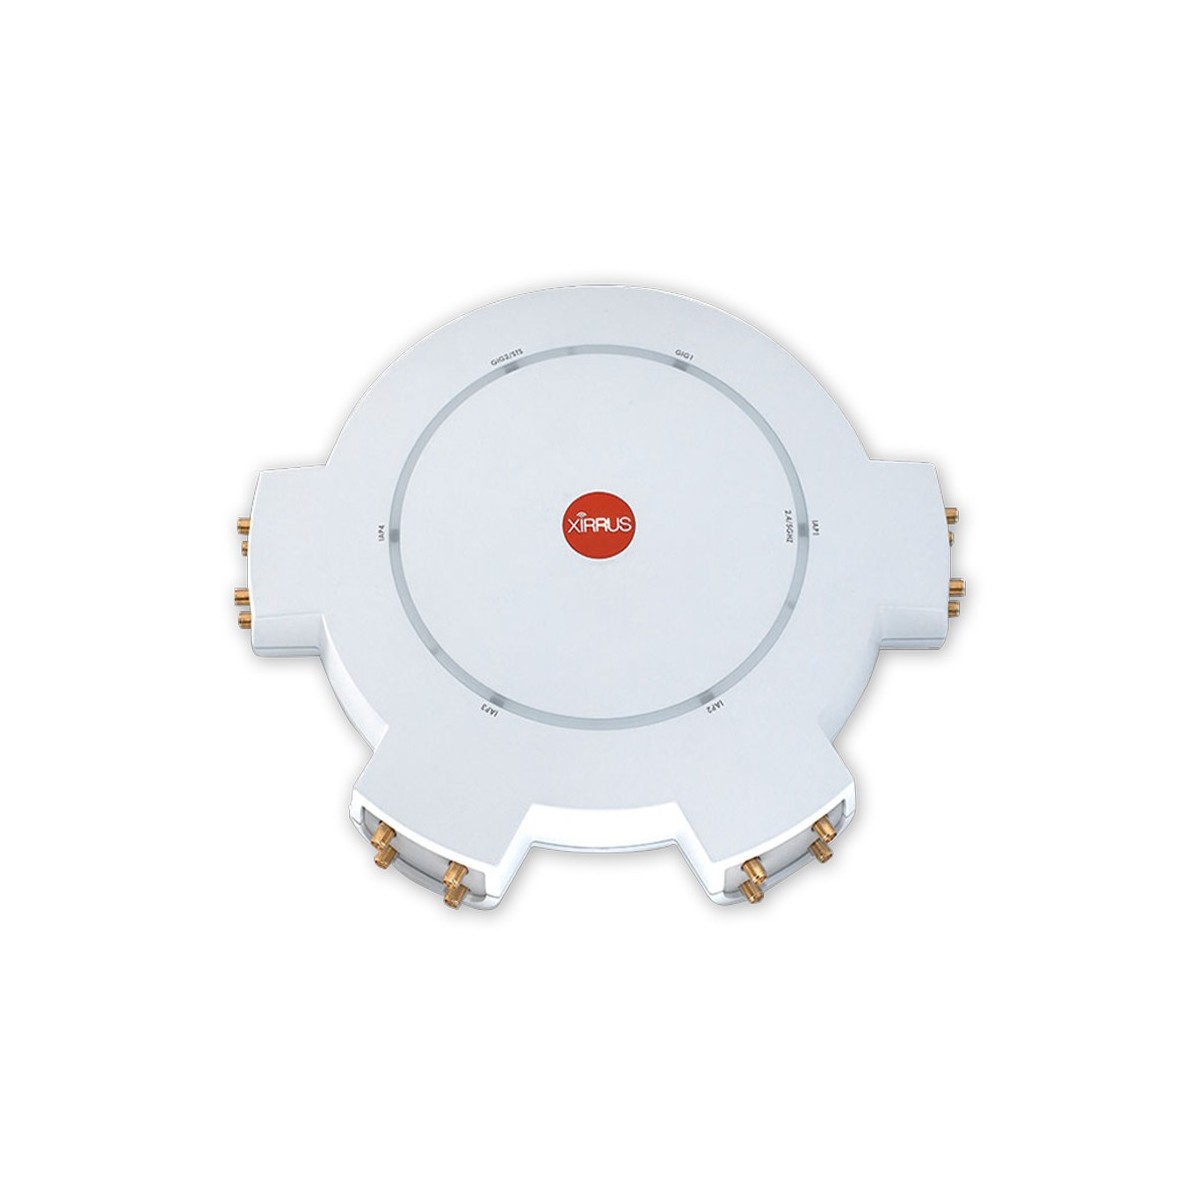 Cambium Networks Cambium Xirrus High Density Indoor 4x4 AP. One 11ac Wave 2 SDR three 5GHz. RP-SMA - Access Point - Reverse SMA 